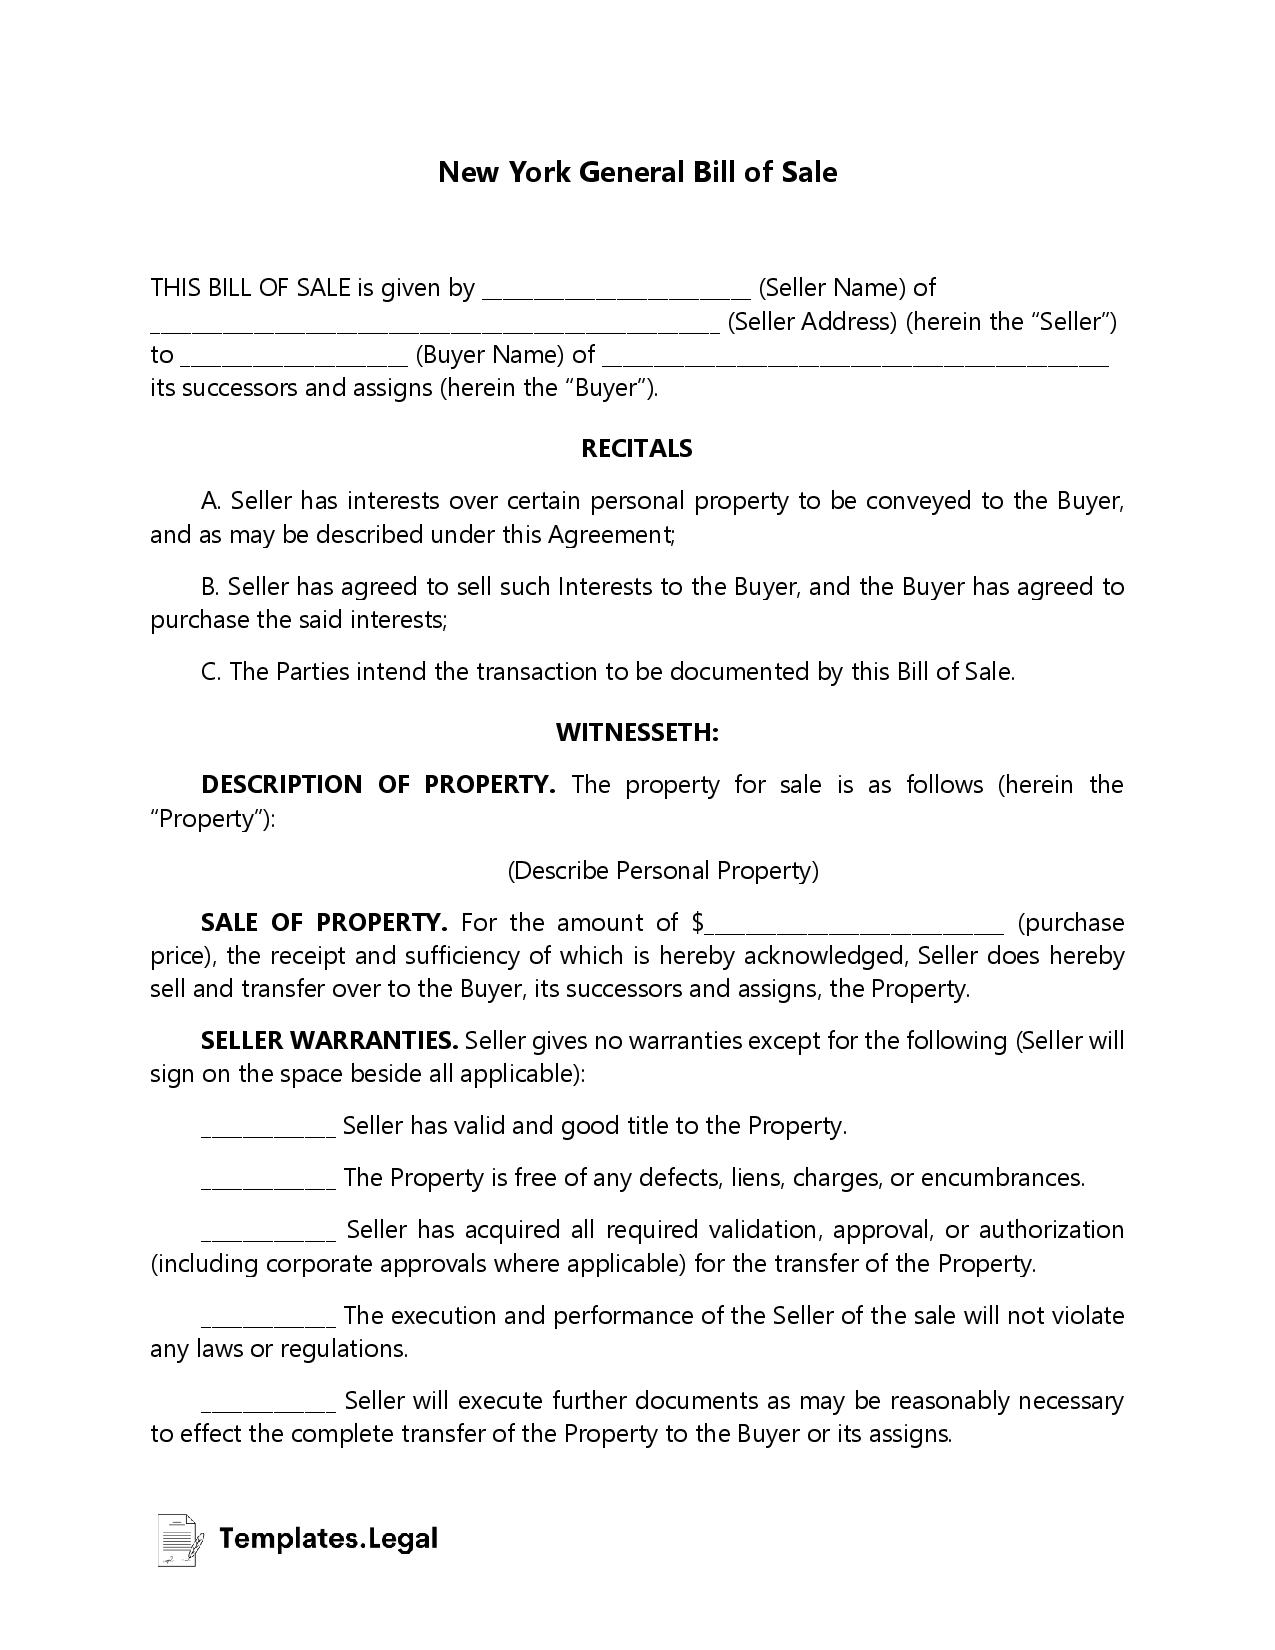 New York General Bill of Sale - Templates.Legal